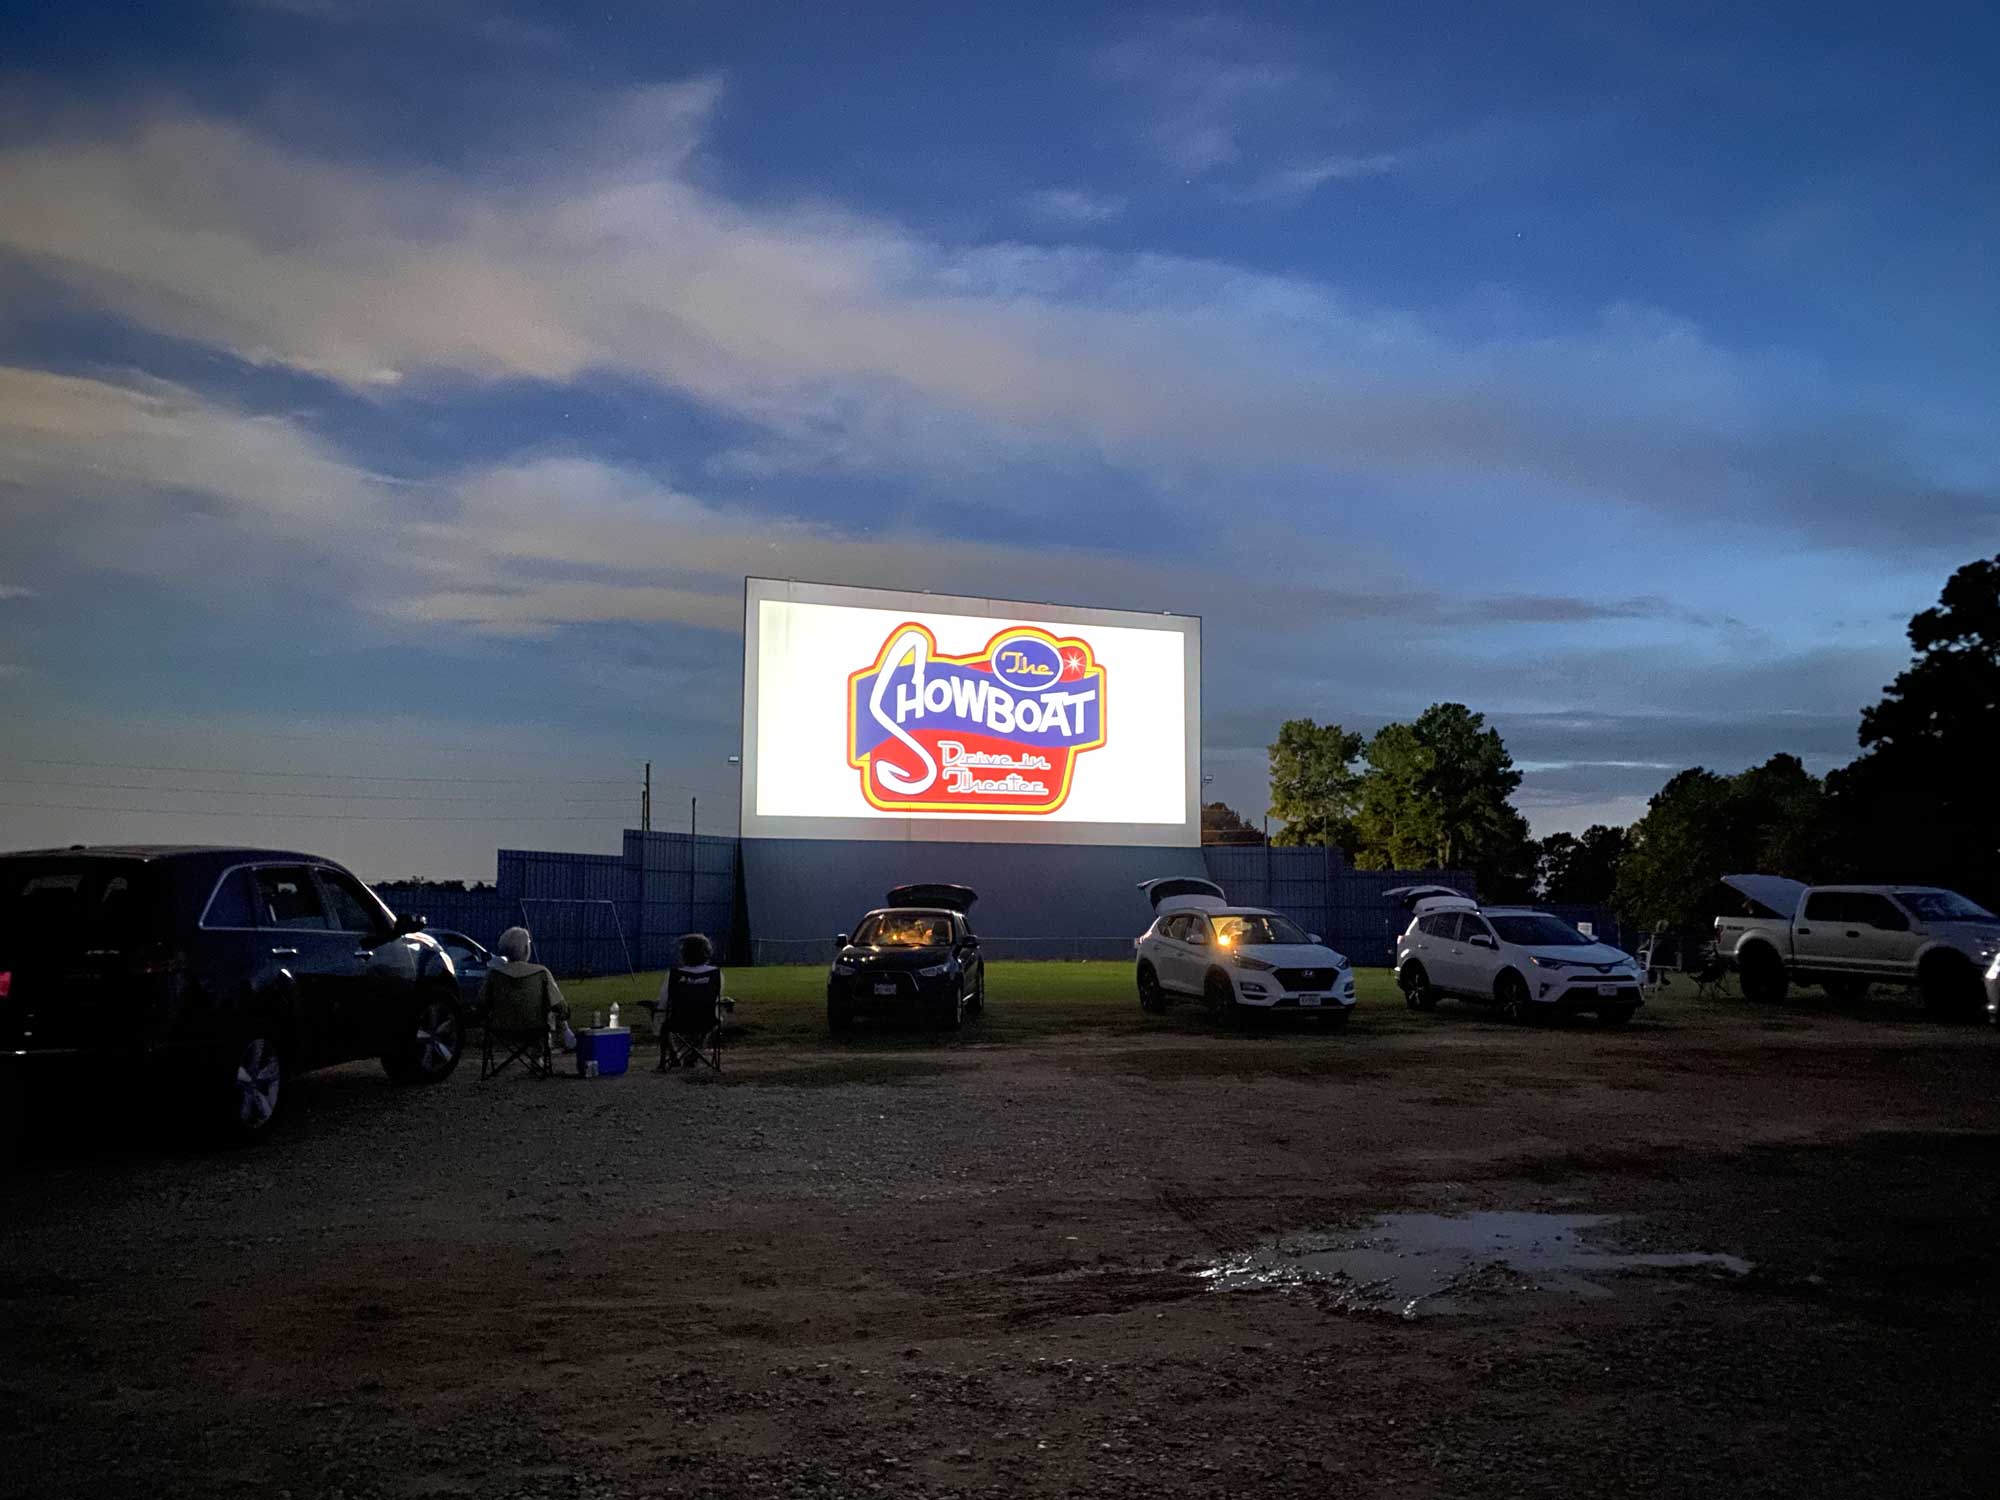 PHOTO: The screen at the Showboat Drive-In theater displaying the logo of the theater. Photo by The Signal Executive Editor Miles Shellshear.